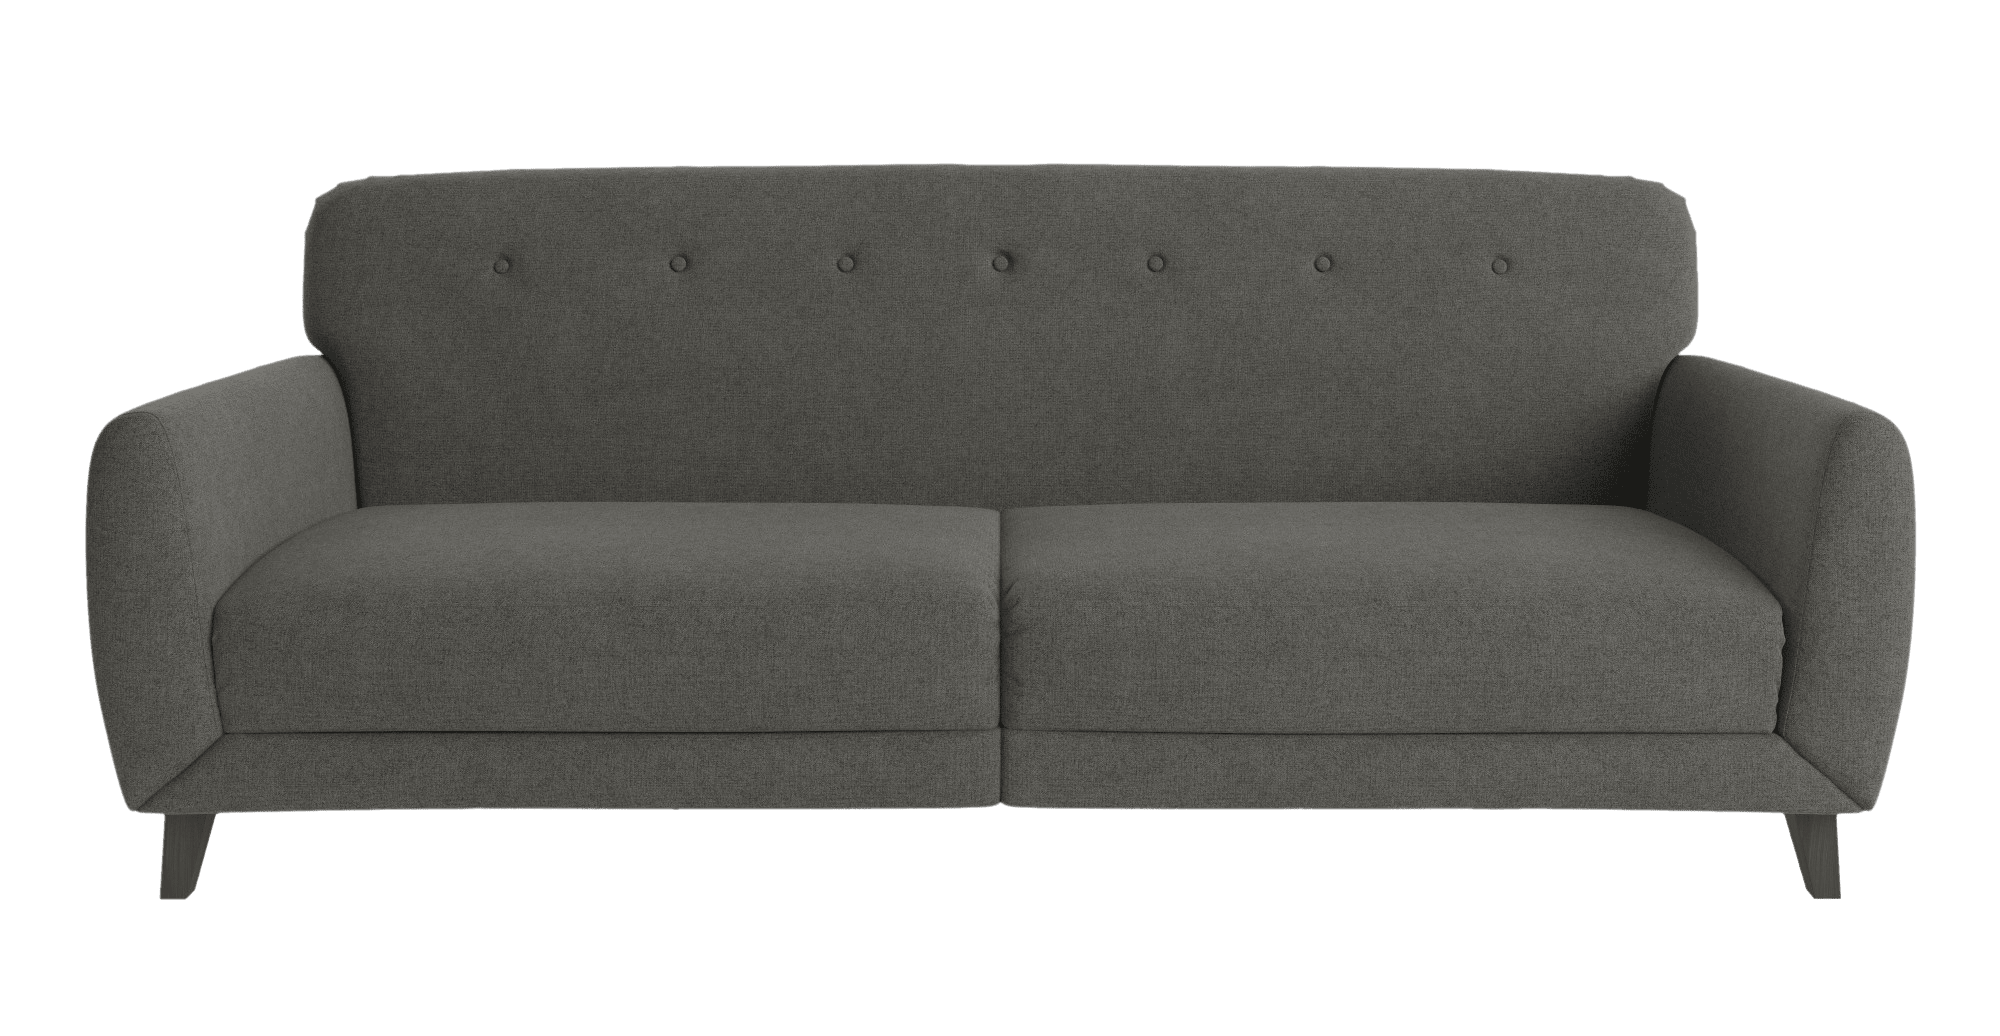 Sofa Bed Image Free Clipart HD PNG Image